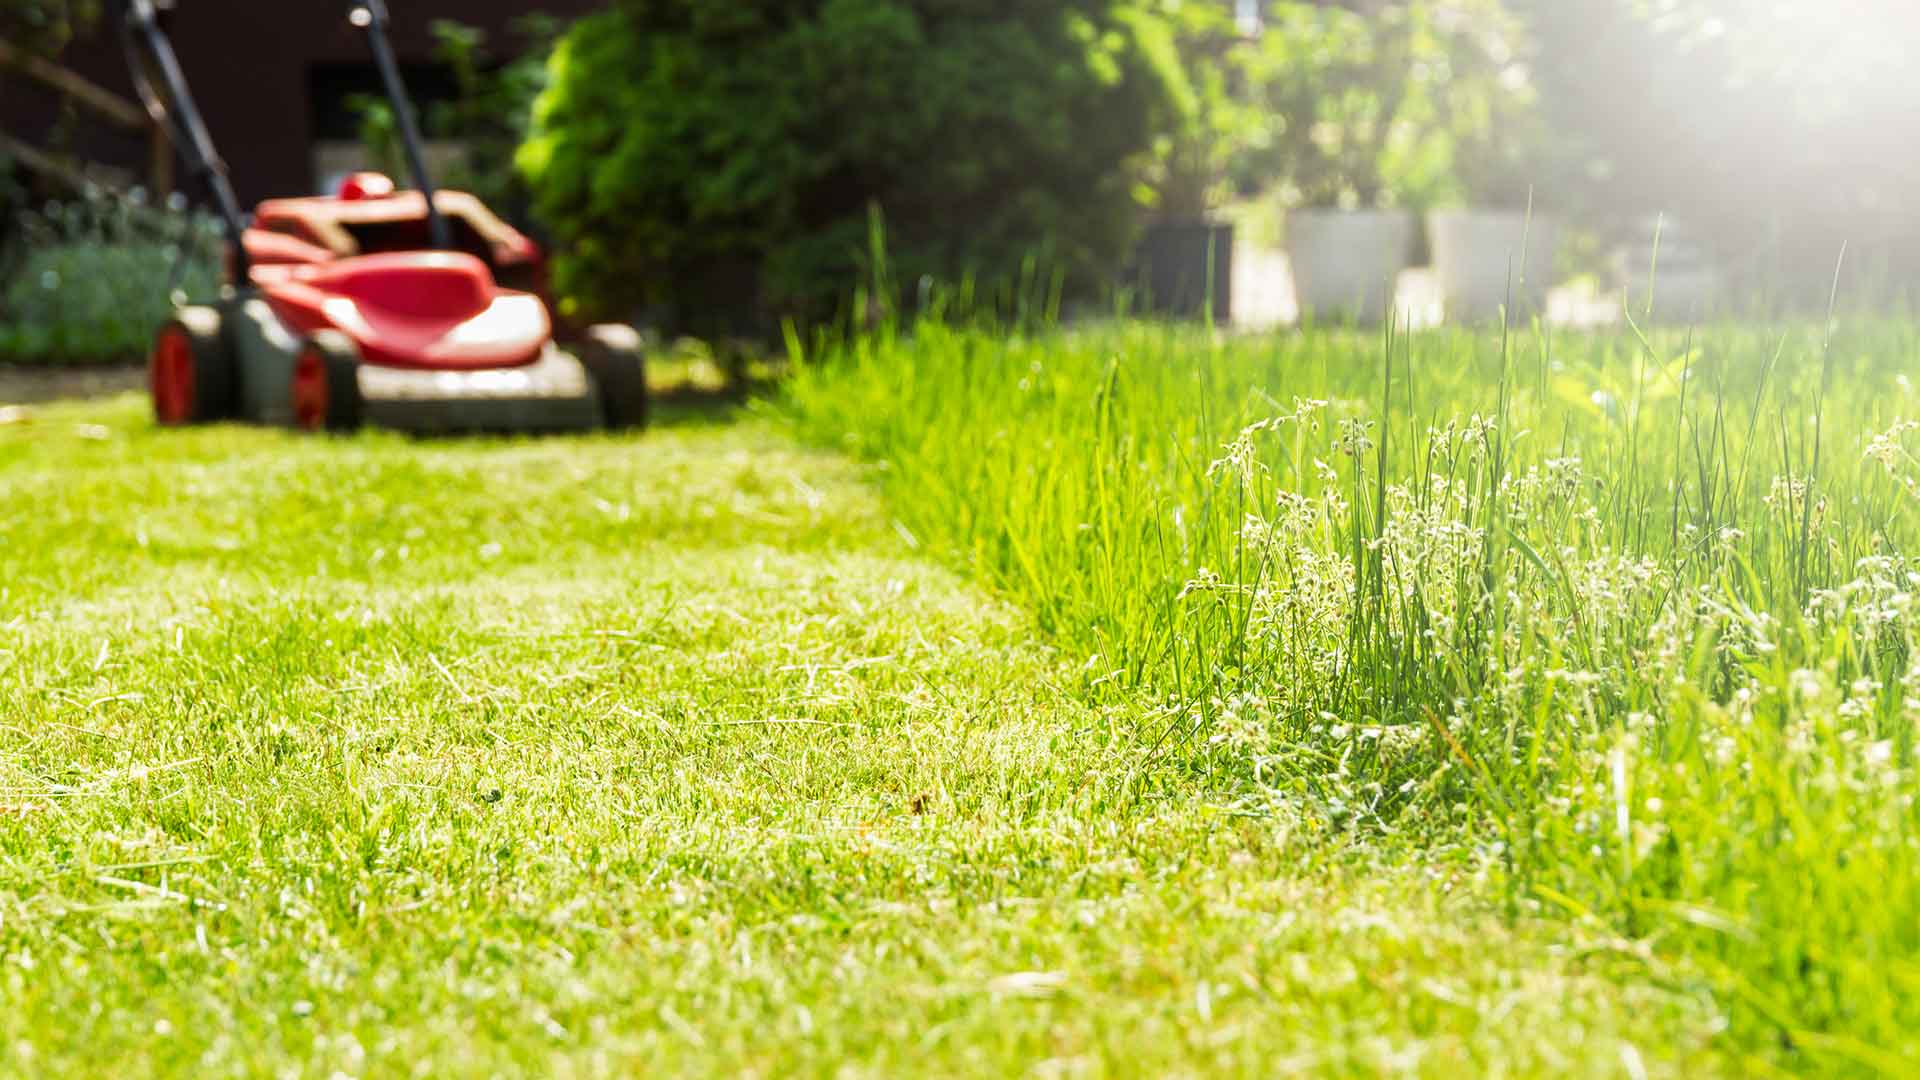 Lawn mowing service in Okotoks, AB.